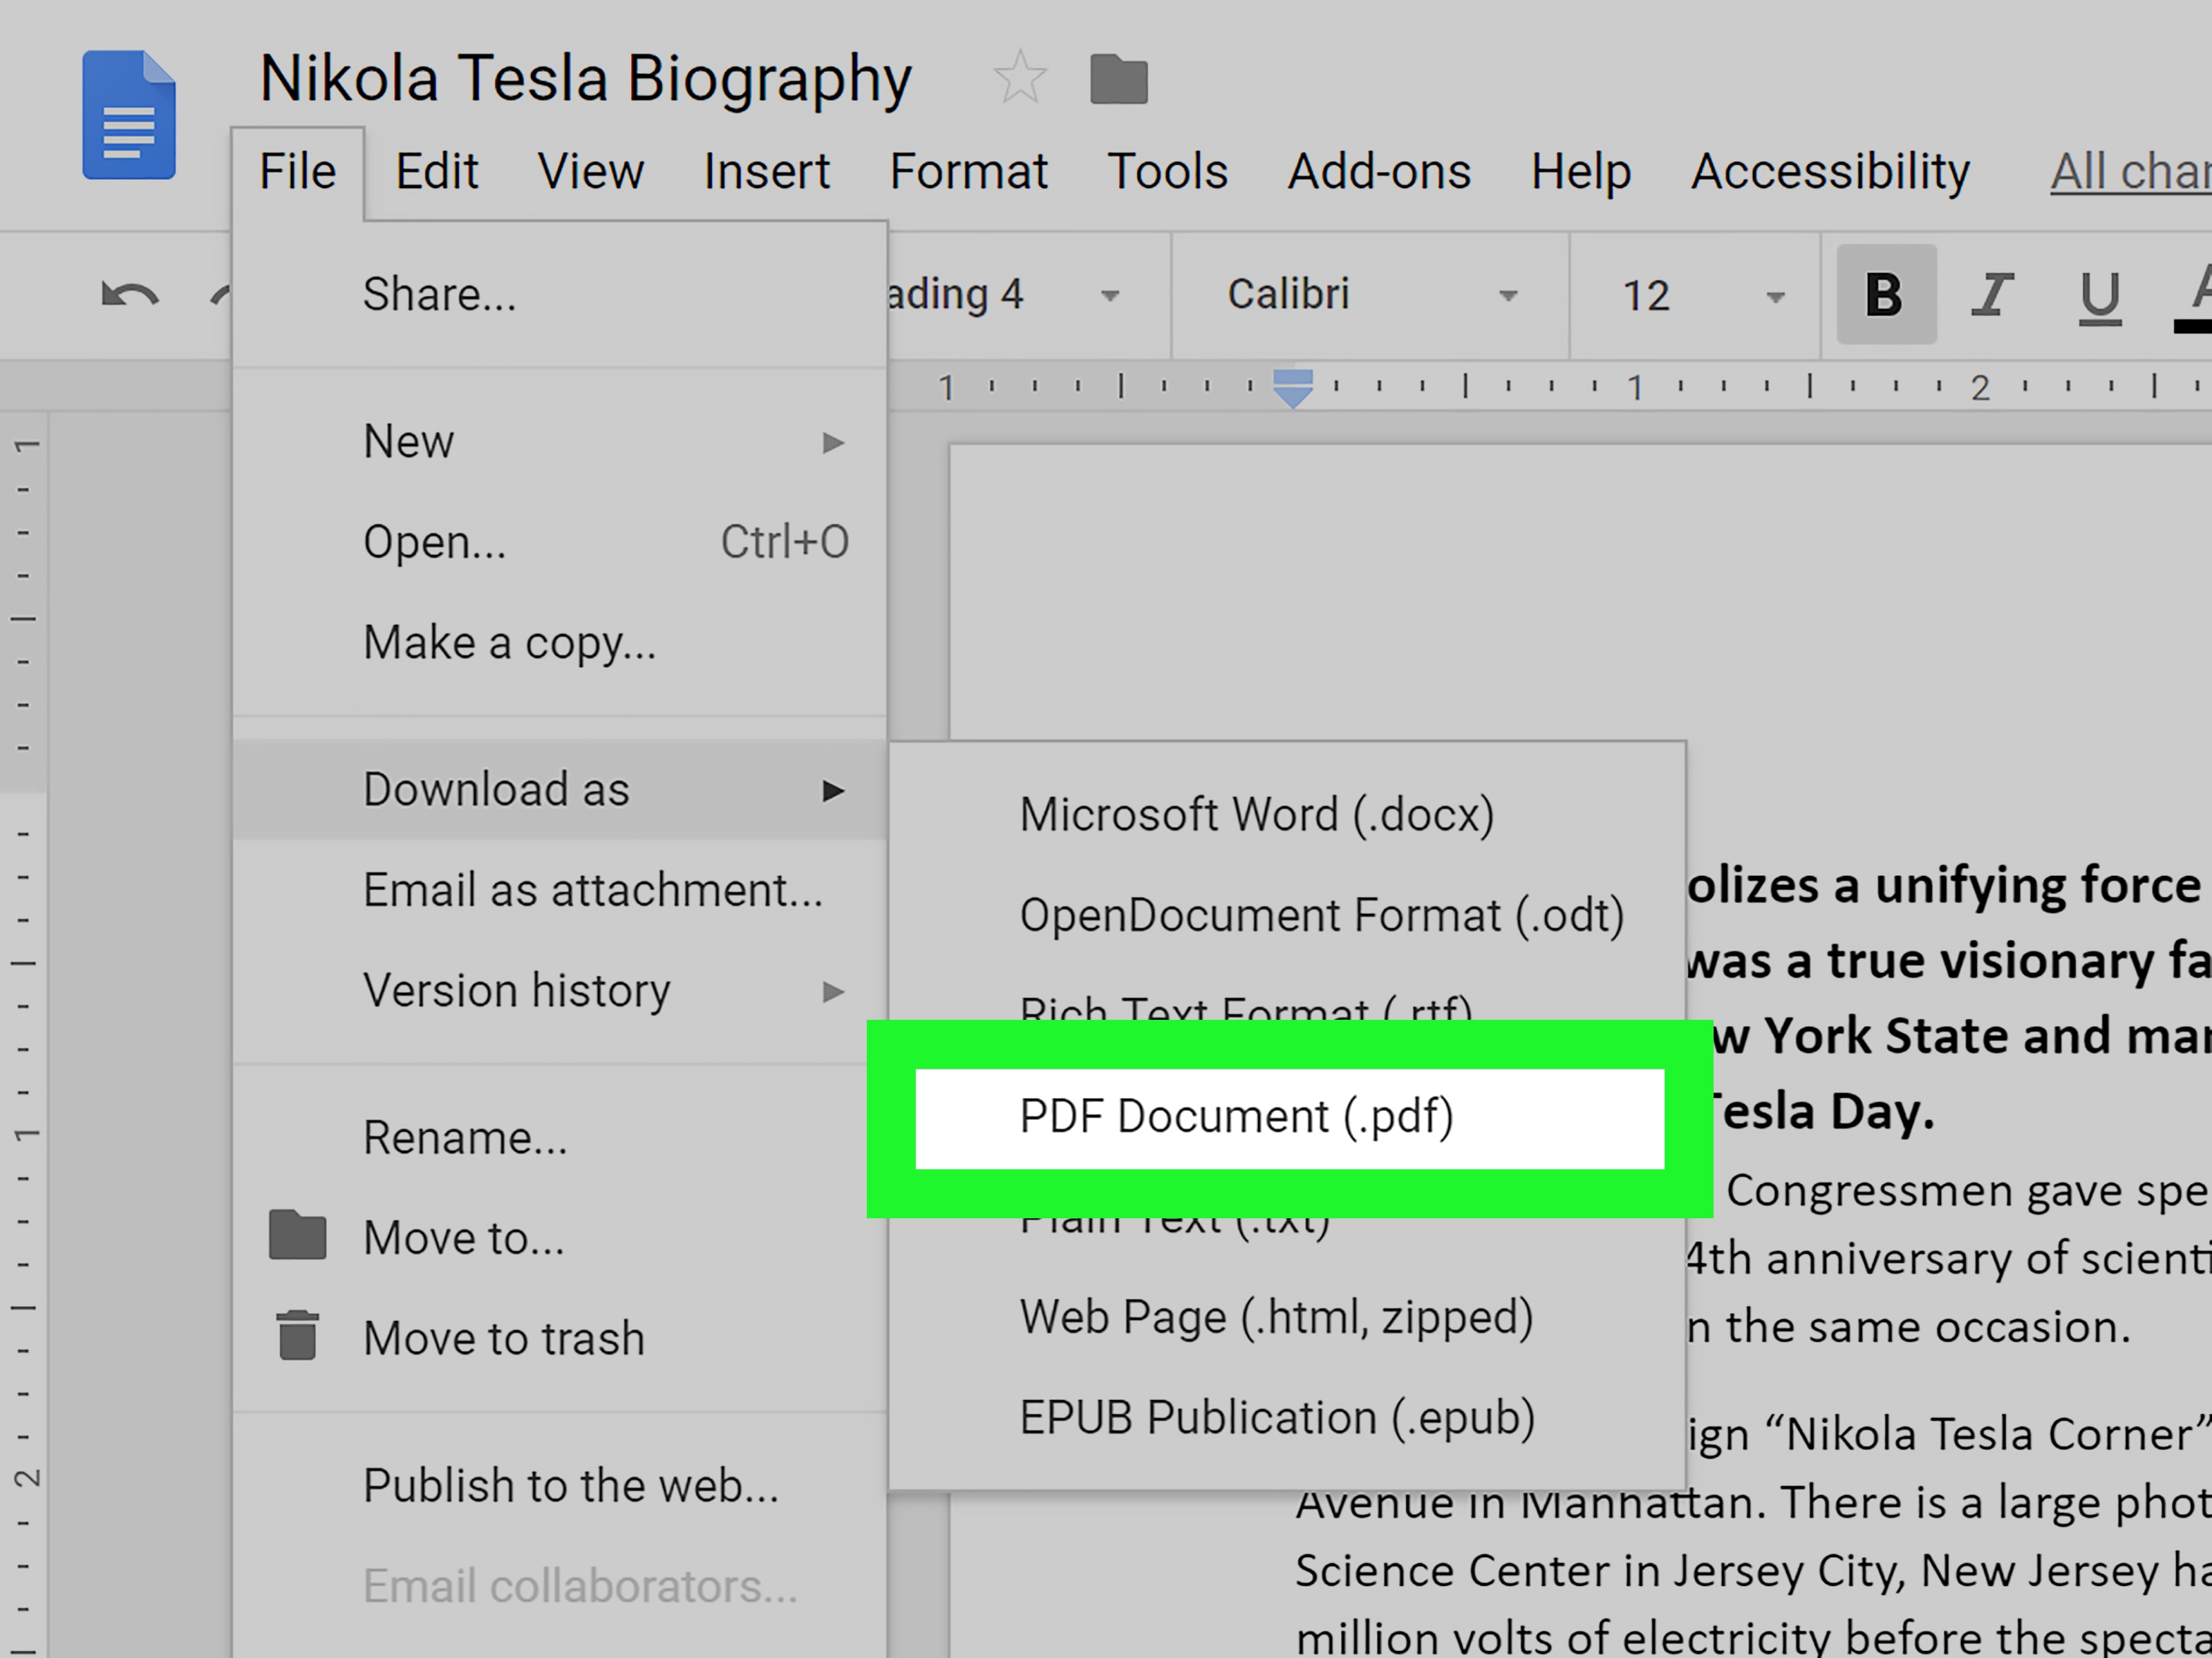 convert pdf to word document for free online